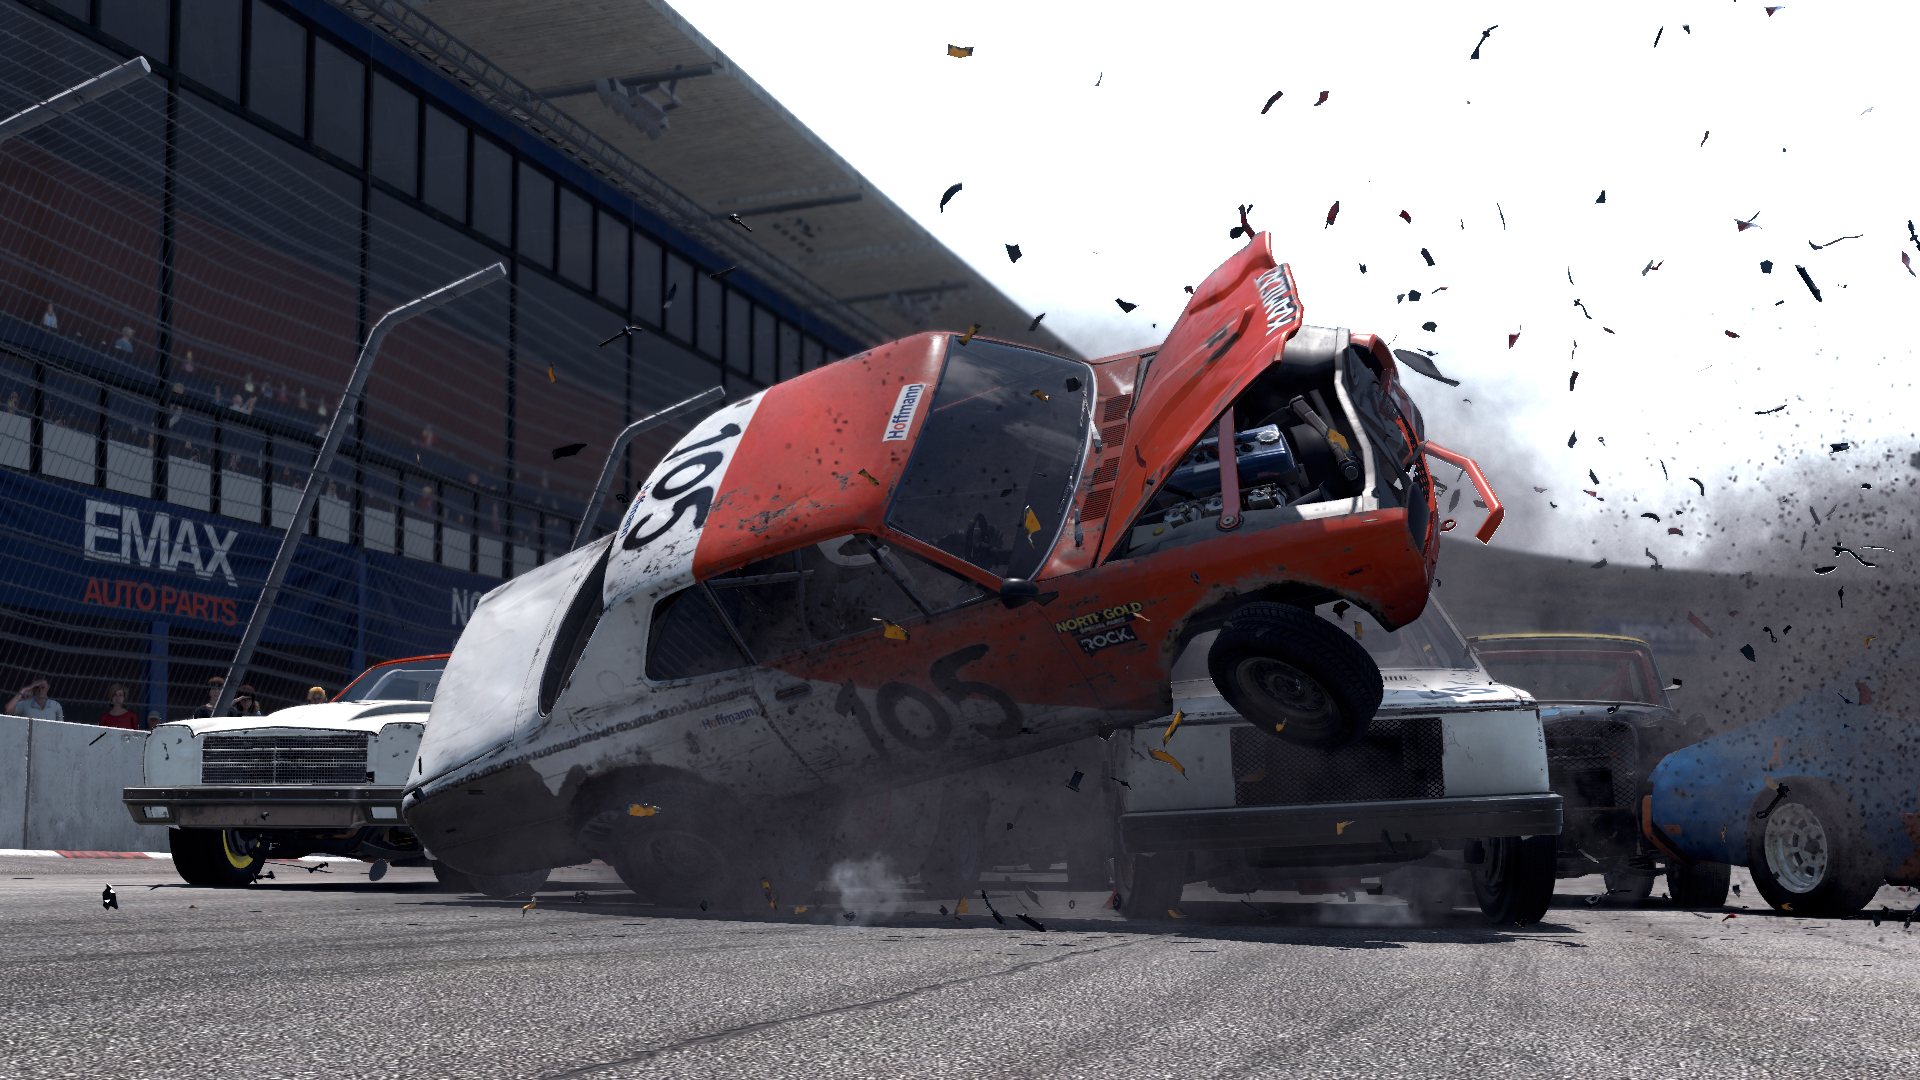 Debris sprays everywhere as one demolition racer t-bones another, turning it on its side, over the hard tarmac in Wreckfest